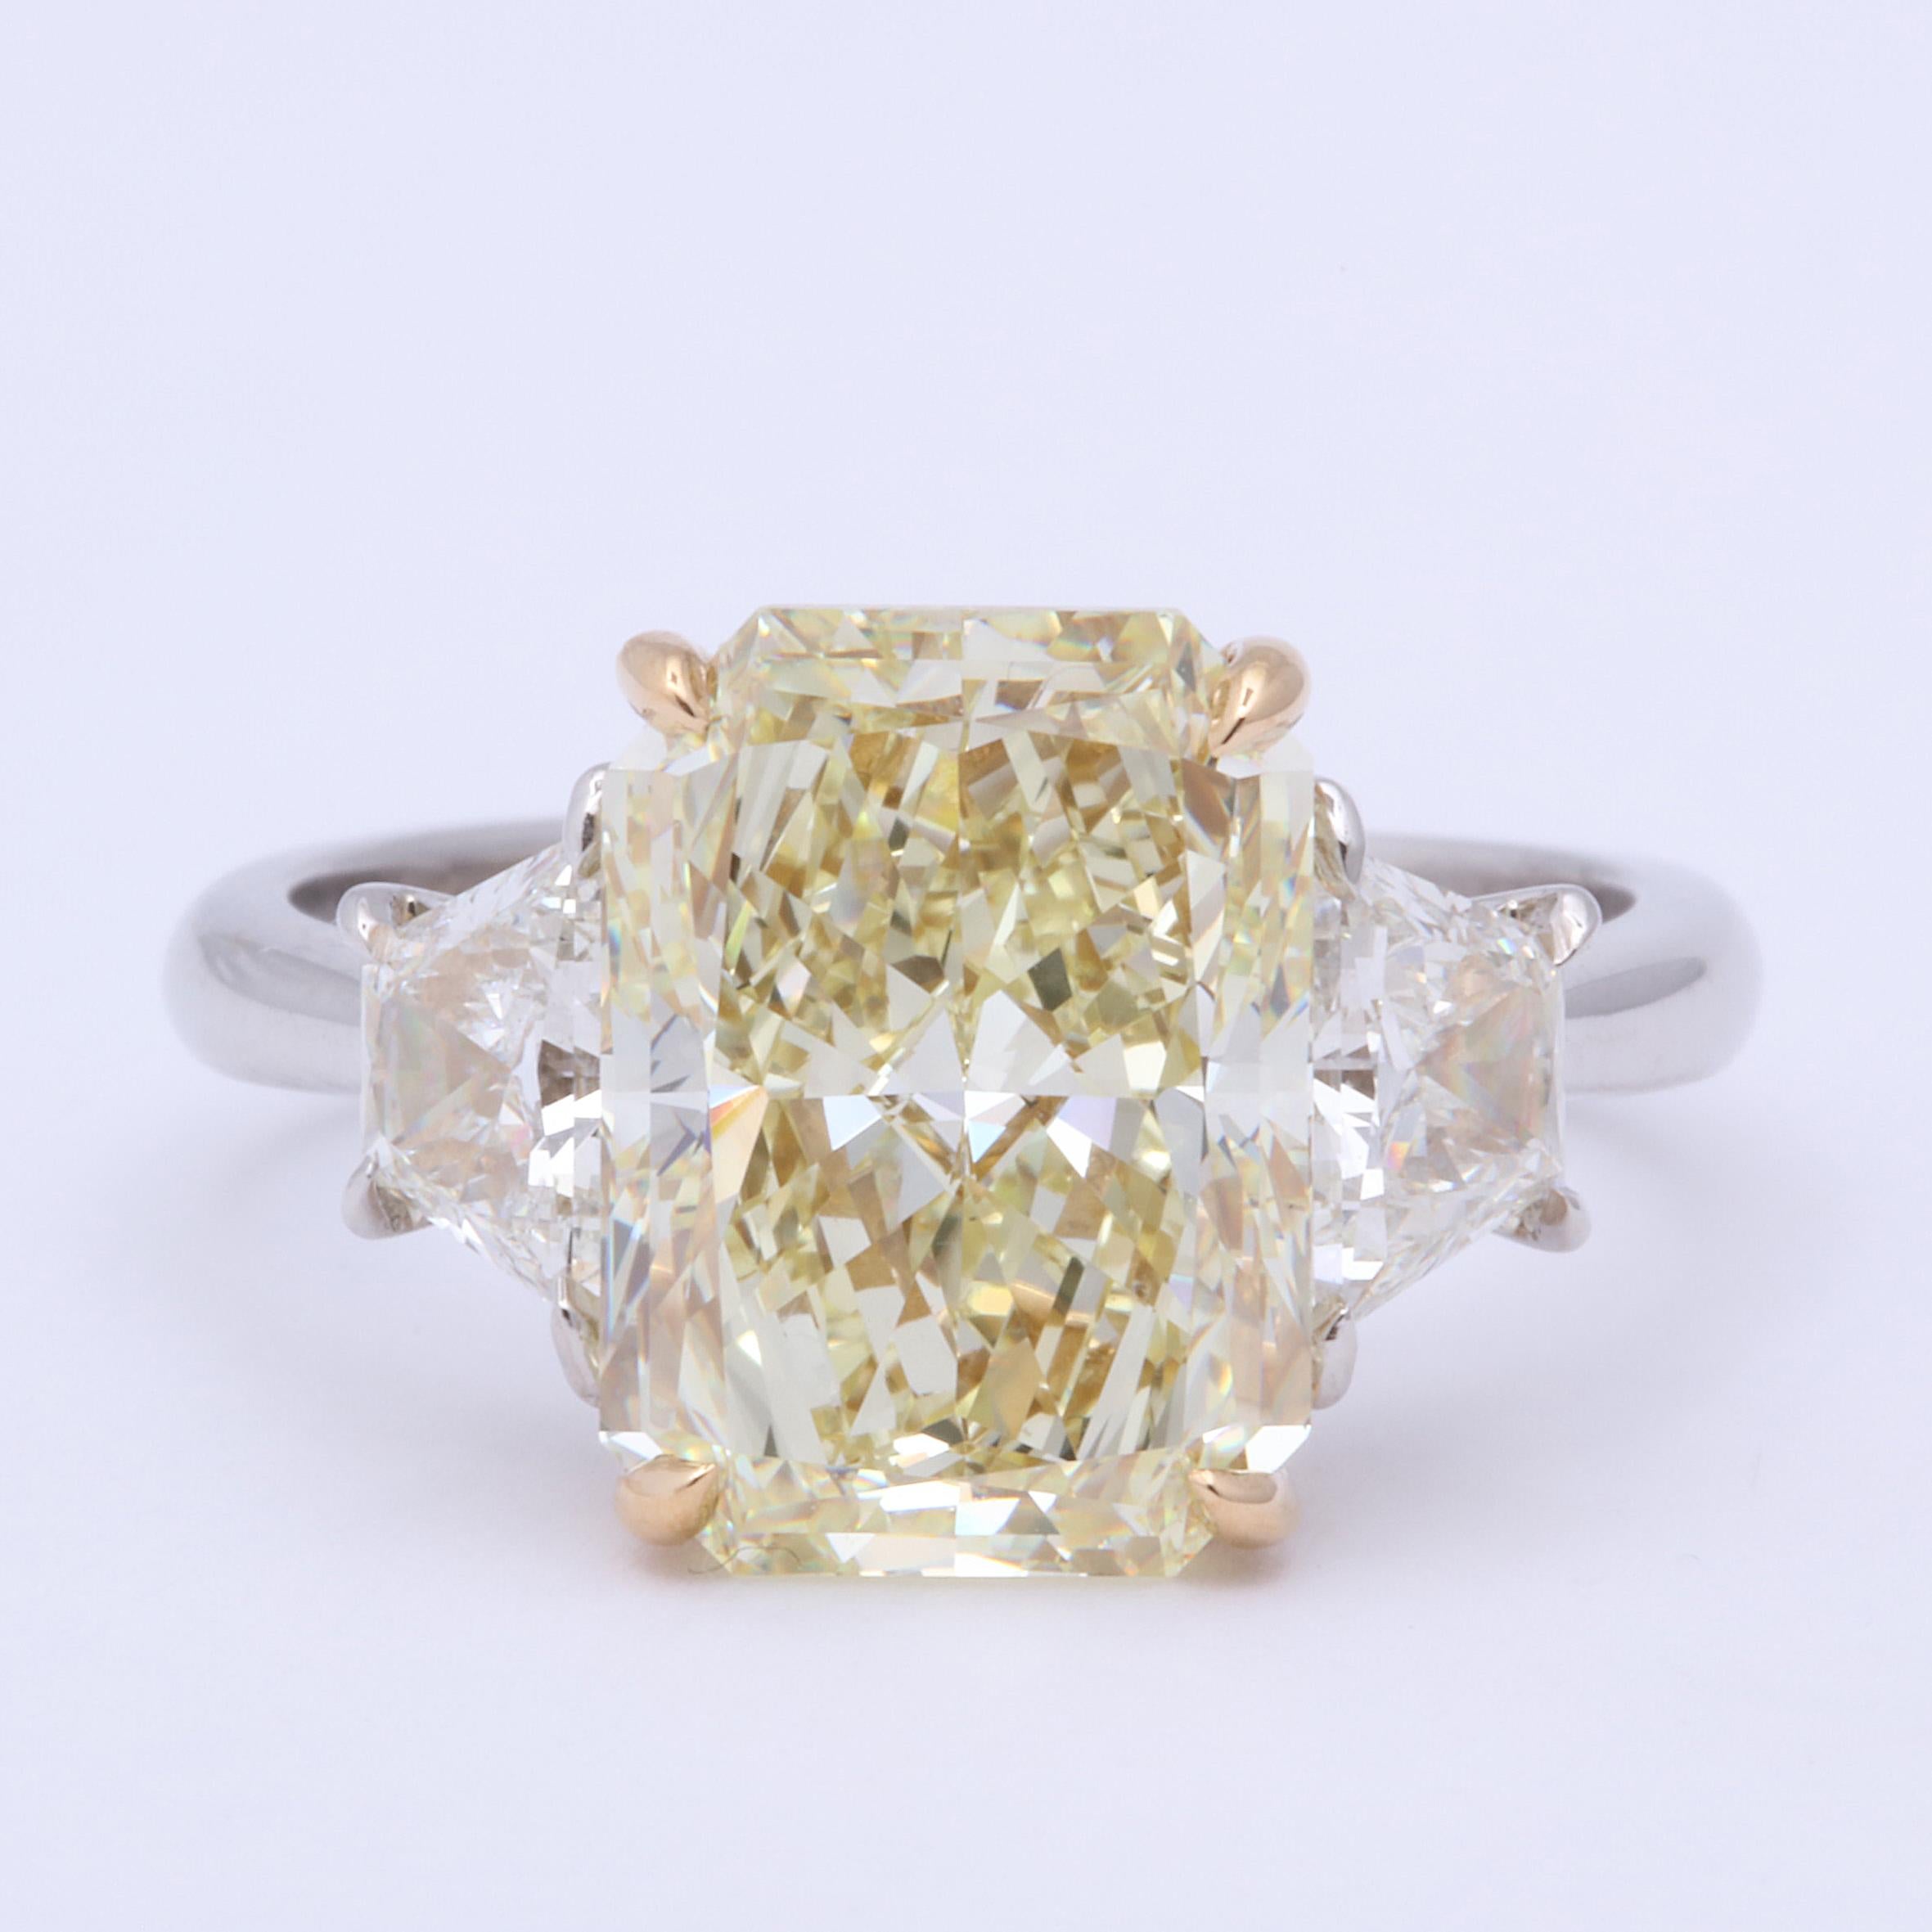 
A beautiful elongated rectangular radiant yellow diamond ring!

5.27 carat center GIA Certified Fancy Light Yellow, VS1 clarity. 

Set with .89 carats of white side diamonds. Set in platinum and 18k yellow gold.

Currently a size 6 but can be